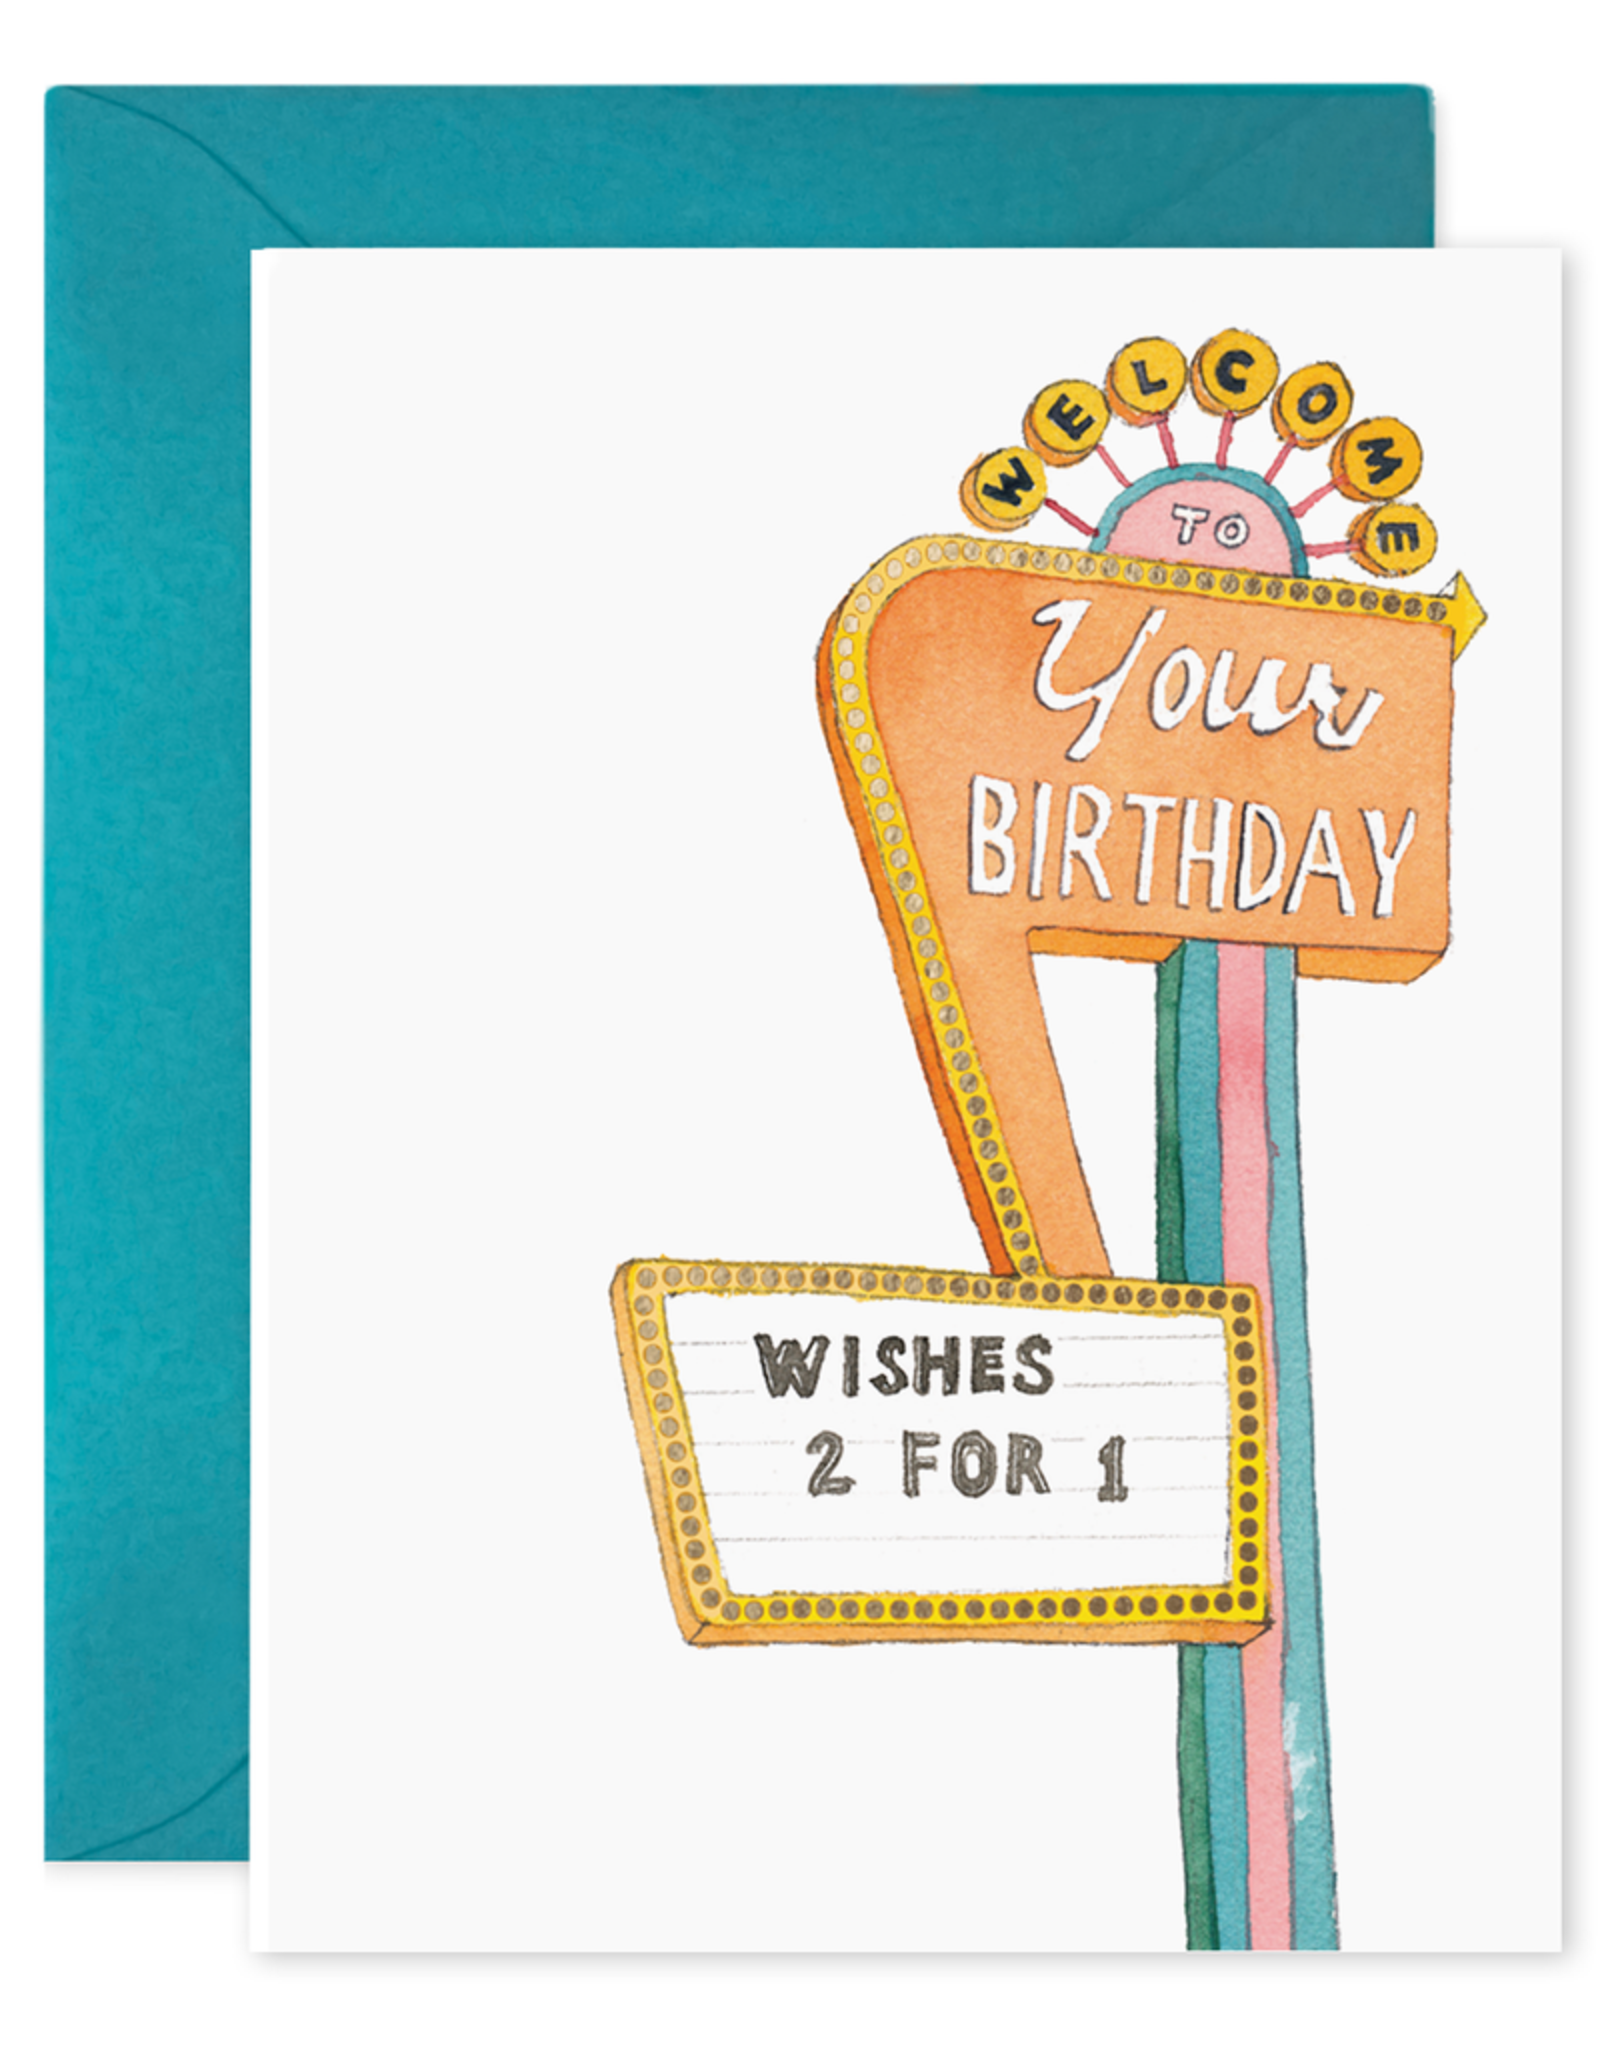 "Wishes 2 for 1" Birthday Greeting Card - E. Frances Paper